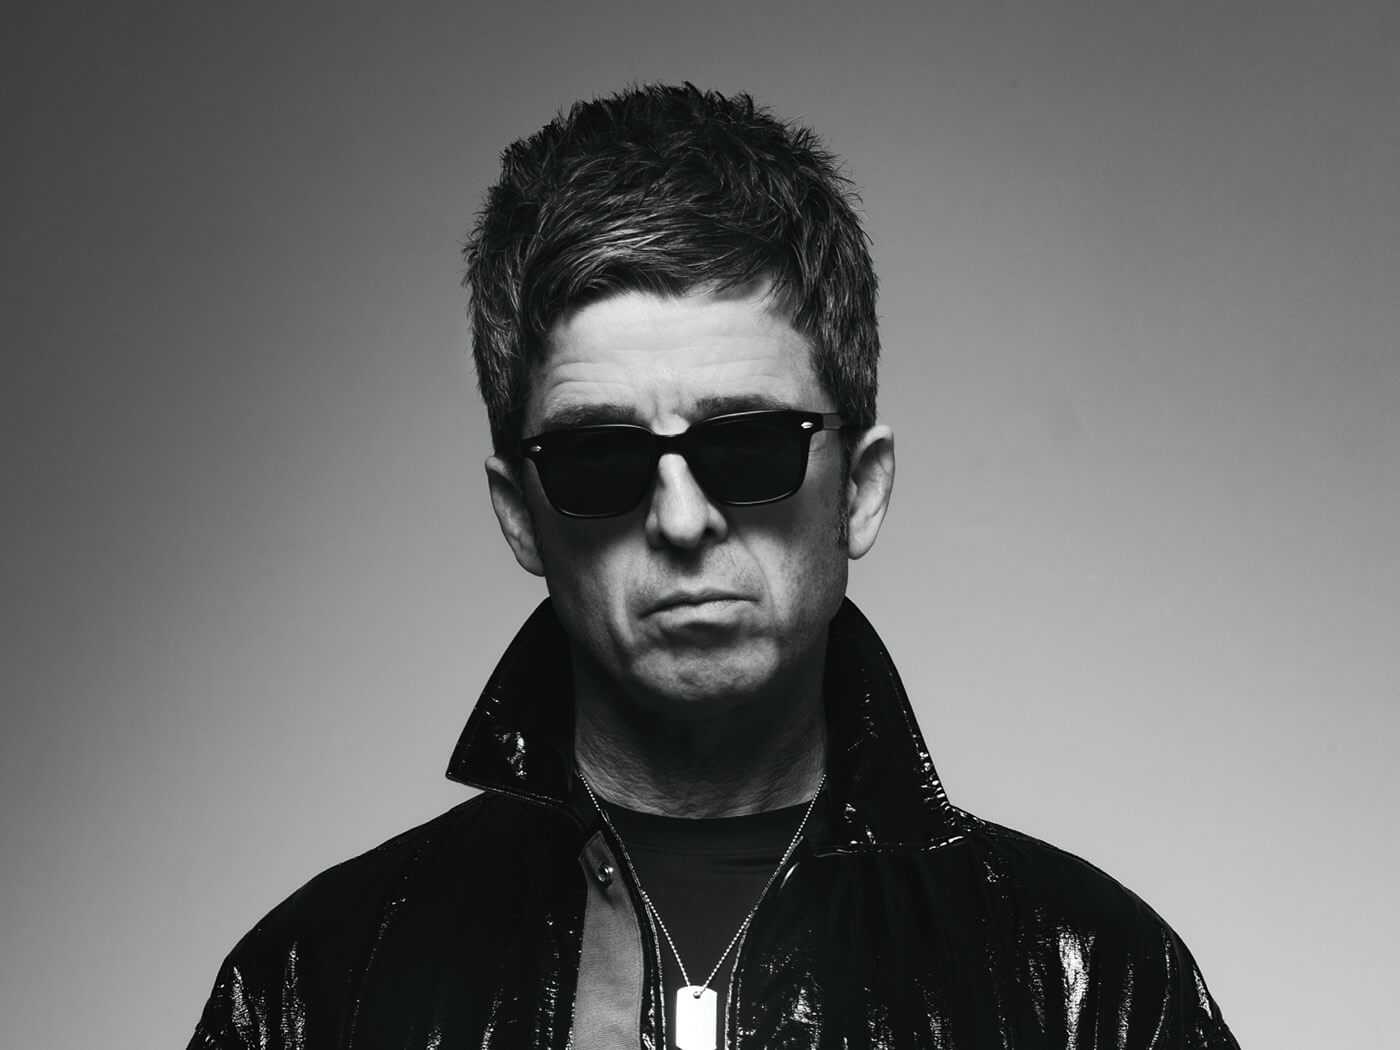 Noel Gallagher announces new album Council Skies, shares single “Easy Now”